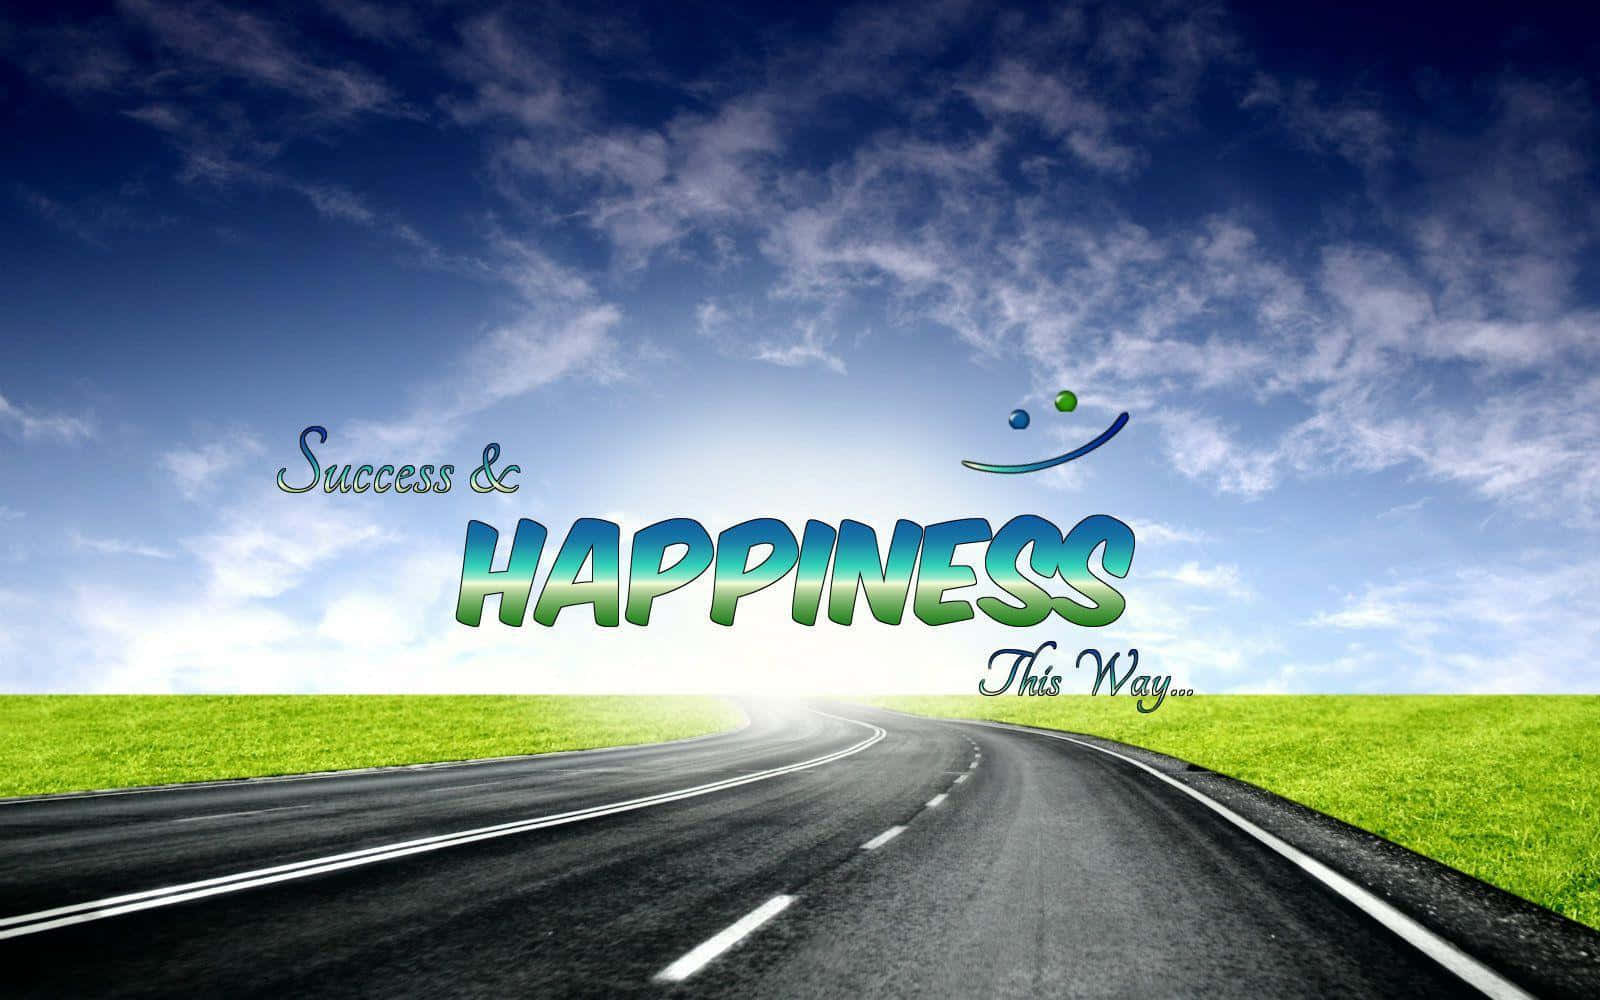 A Road With The Words'success Happiness The Way'